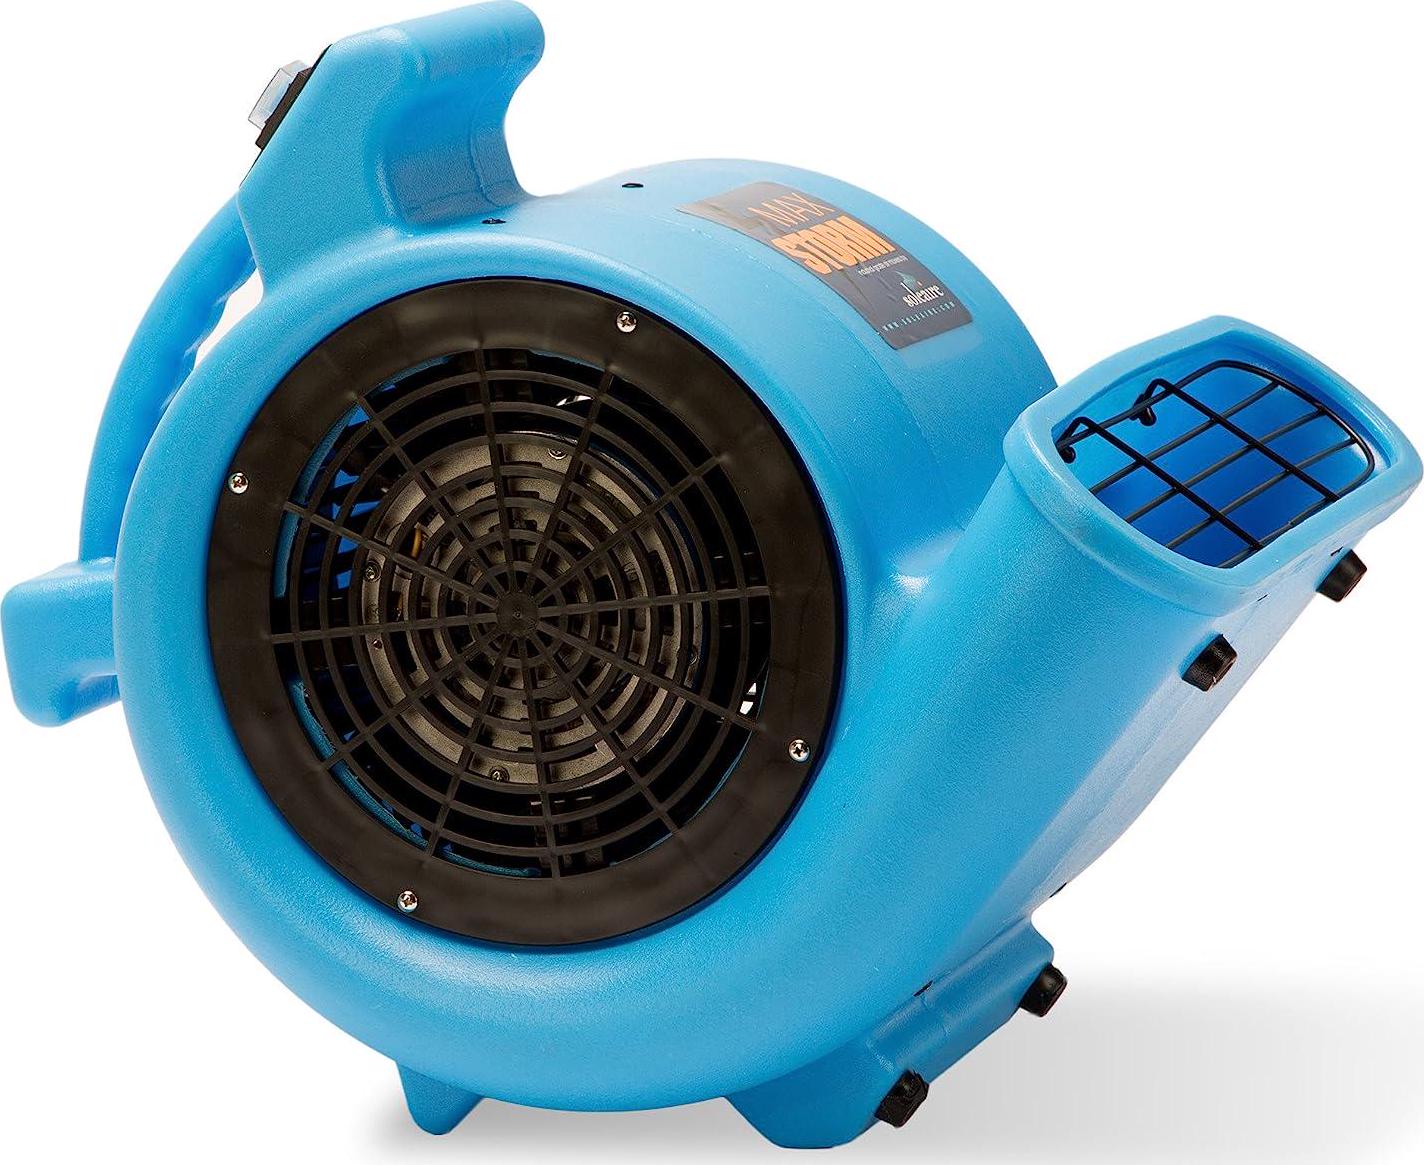 Max Storm 1/2 HP Durable Lightweight Air Mover Carpet Dryer Blower Floor Fan for Pro Janitorial Cleaner, Blue, 1 Pack